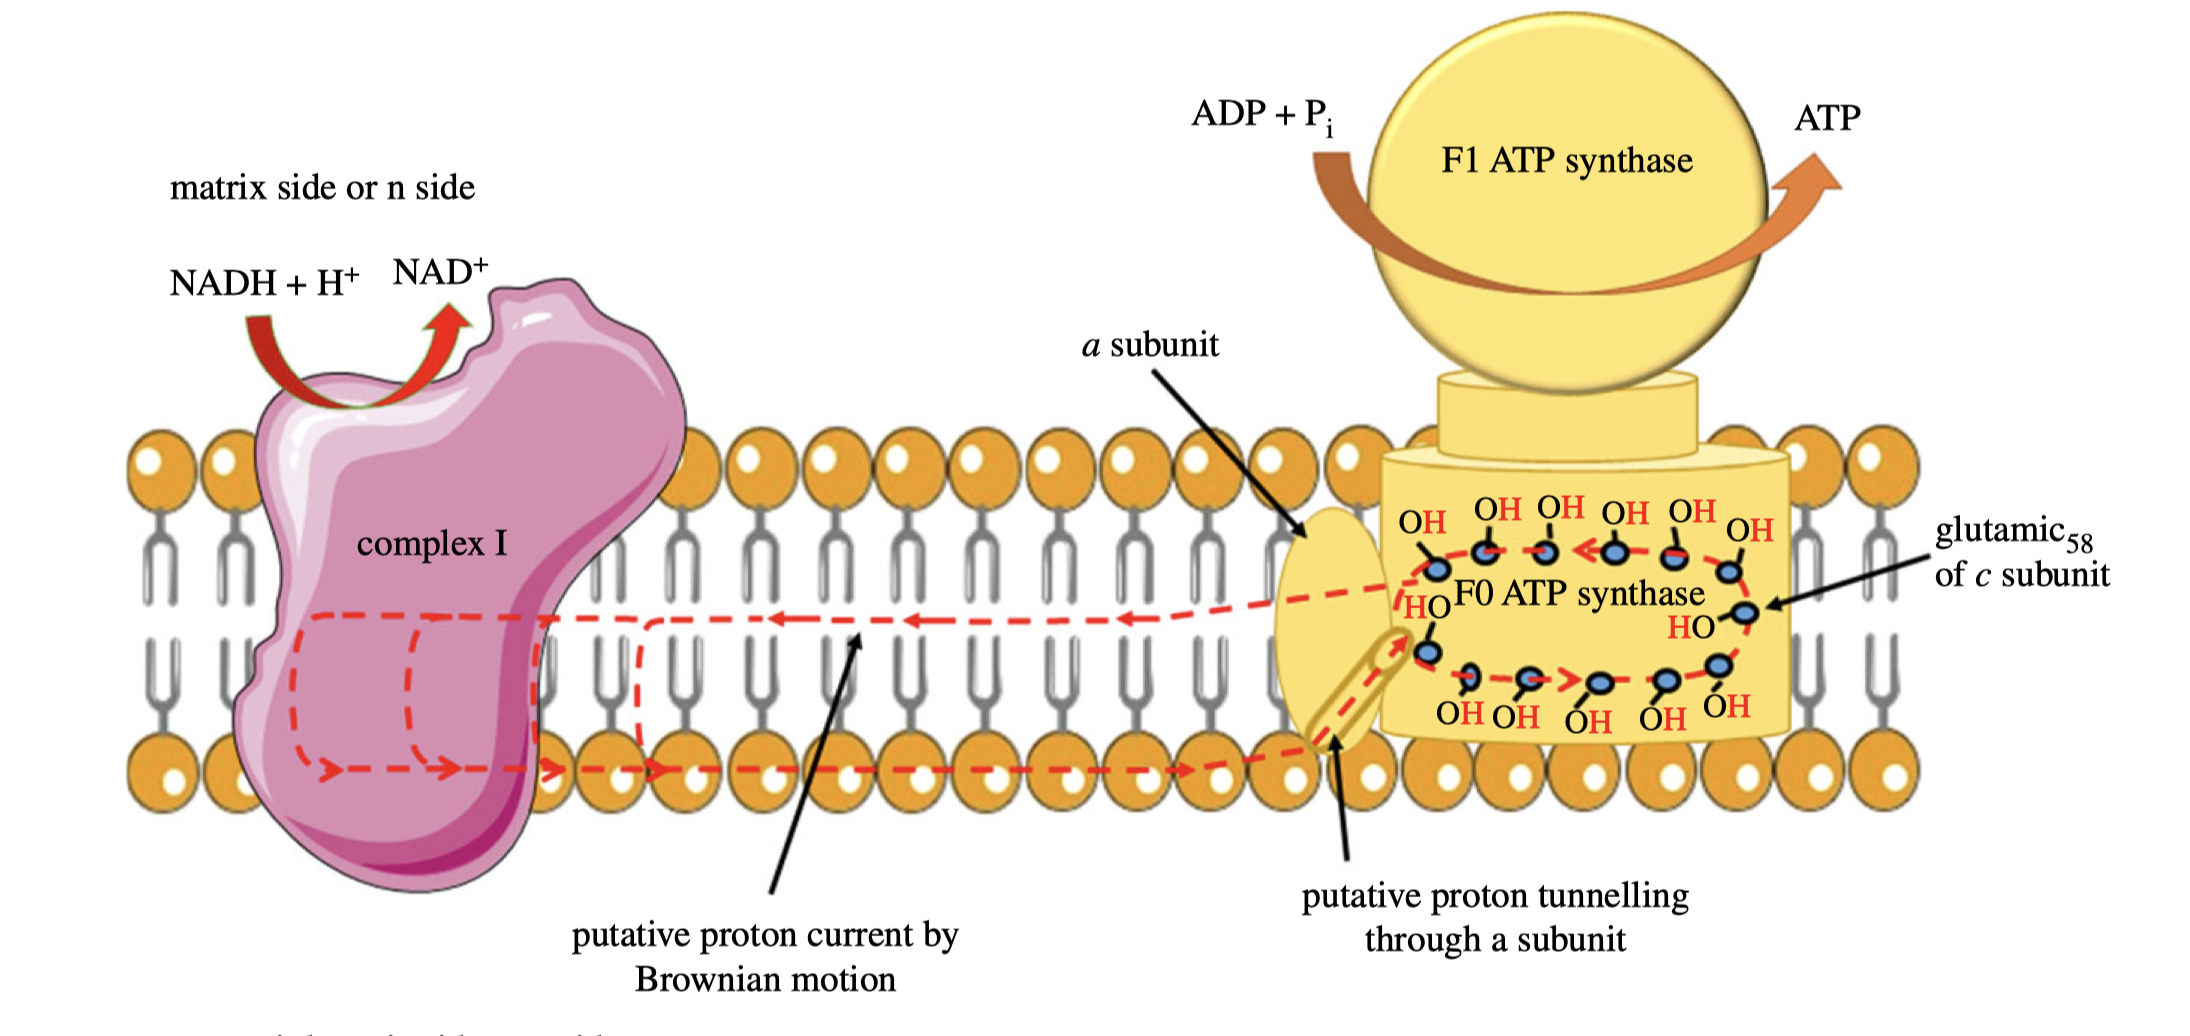 A possible lateral proton circuit suggested by Morelli (2019). Protons are only pumped from the middle to the P side, then trasferred through the hydrophilic heads of phospholipids to ATP synthase. After a complete turn in ATP synthase, protons move back through channelling in the middle of the membrane to complex I, but not to the N side